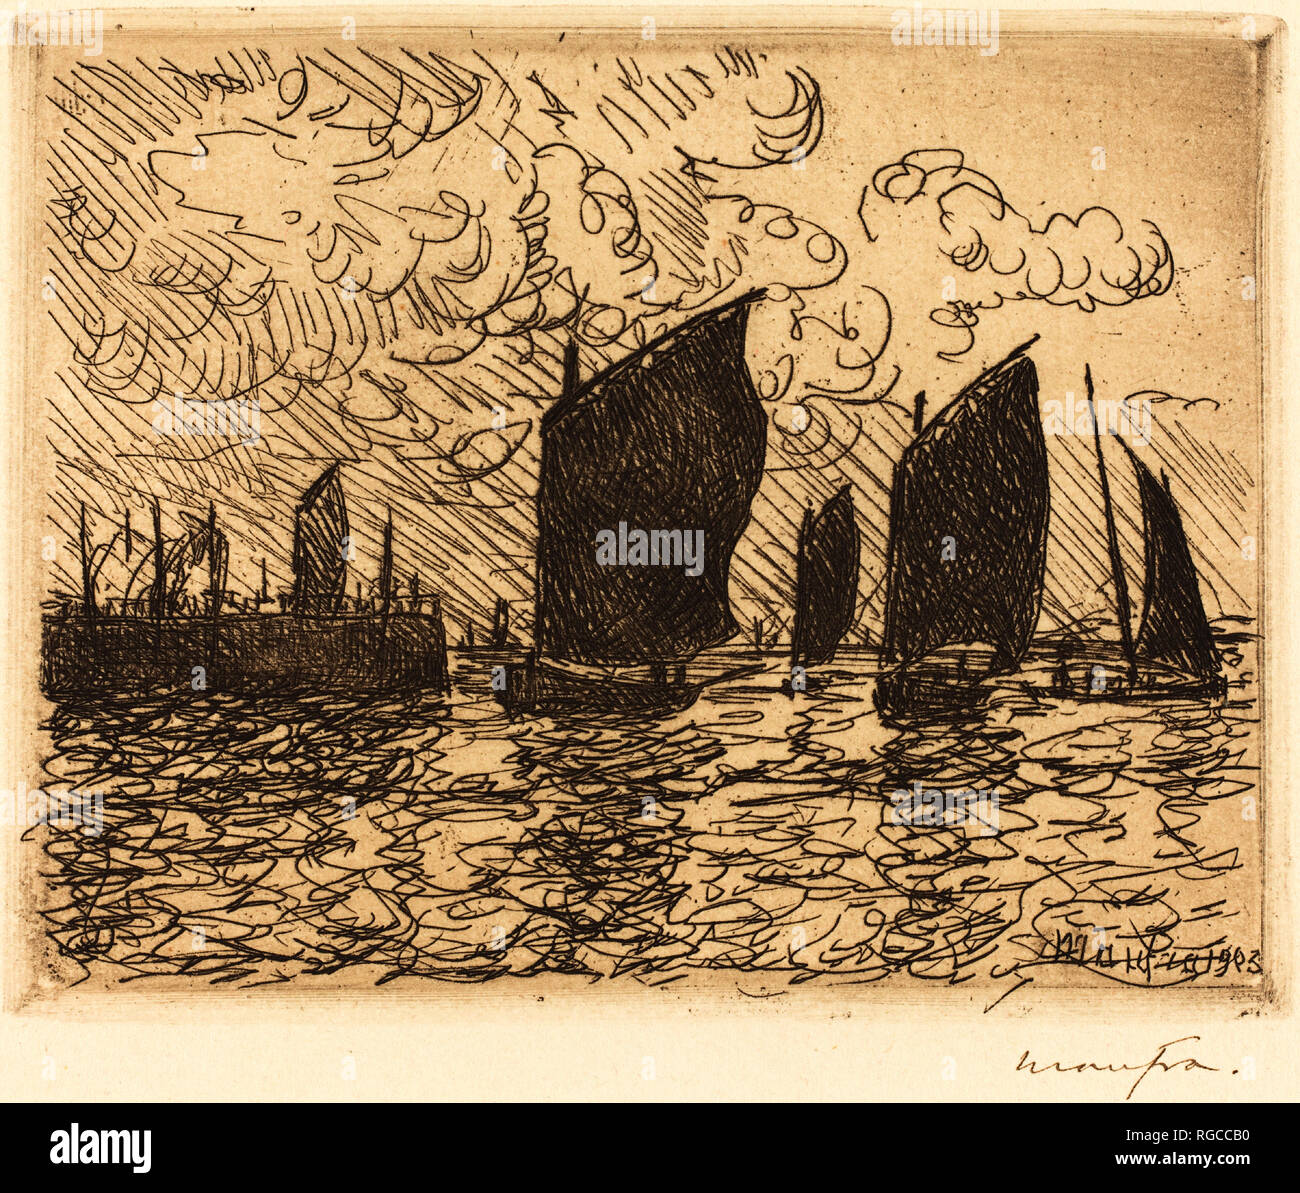 Return of the Boats. Dated: 1903. Dimensions: plate: 10.9 x 13.9 cm (4 5/16 x 5 1/2 in.)  sheet: 19.6 x 26 cm (7 11/16 x 10 1/4 in.). Medium: etching in black on wove paper. Museum: National Gallery of Art, Washington DC. Author: Maxime Maufra. Stock Photo